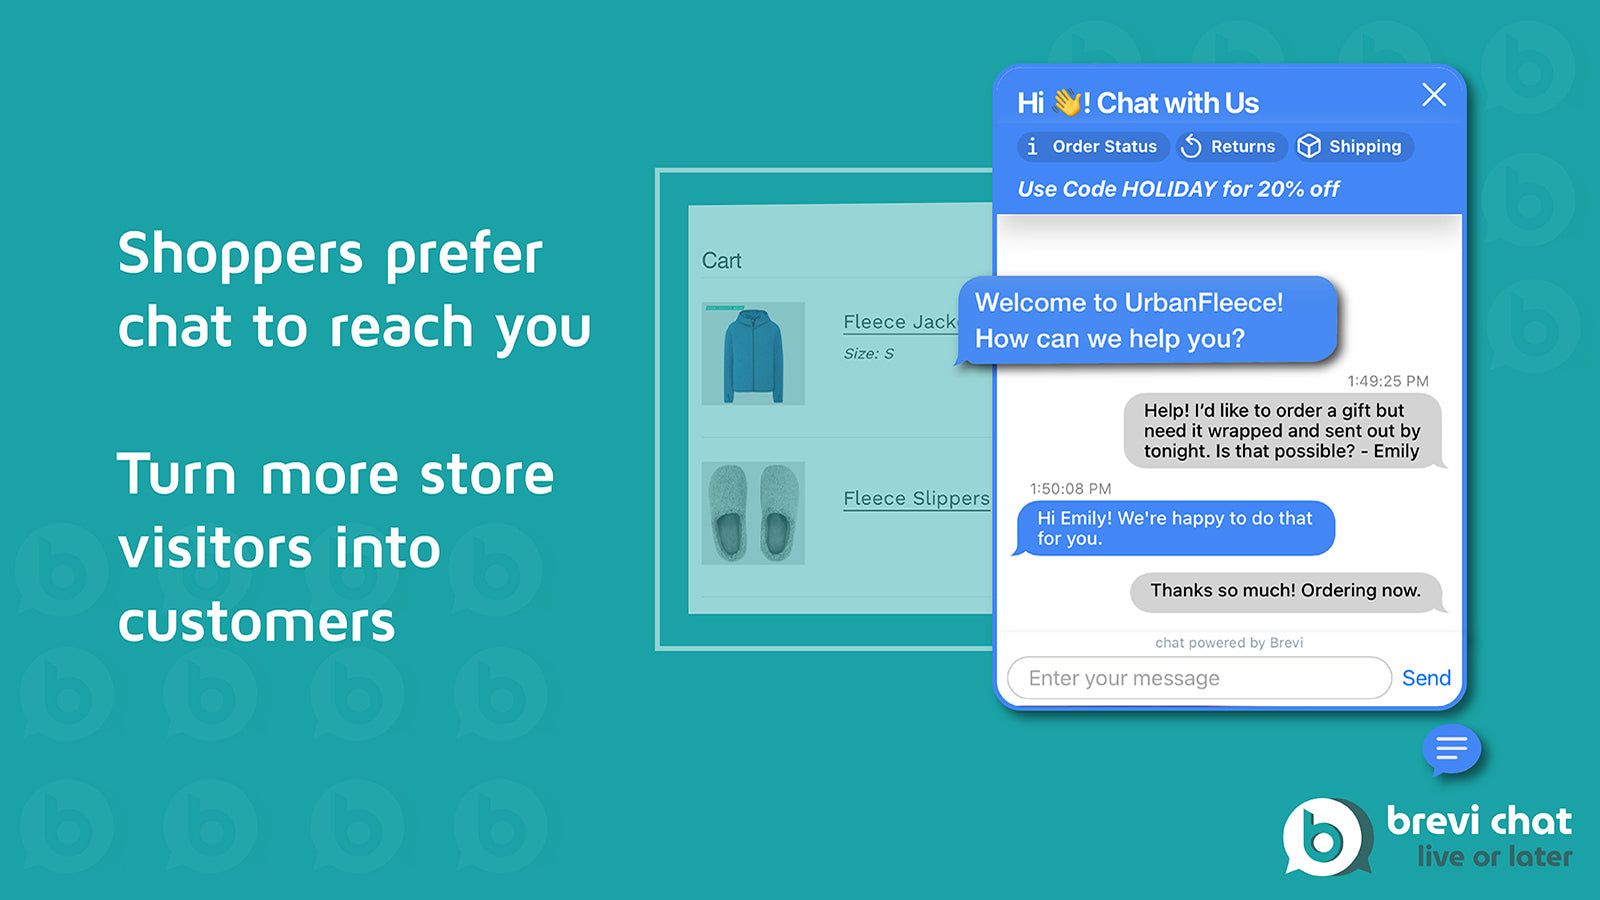 Shoppers prefer chat. Turn more store visitors into customers.